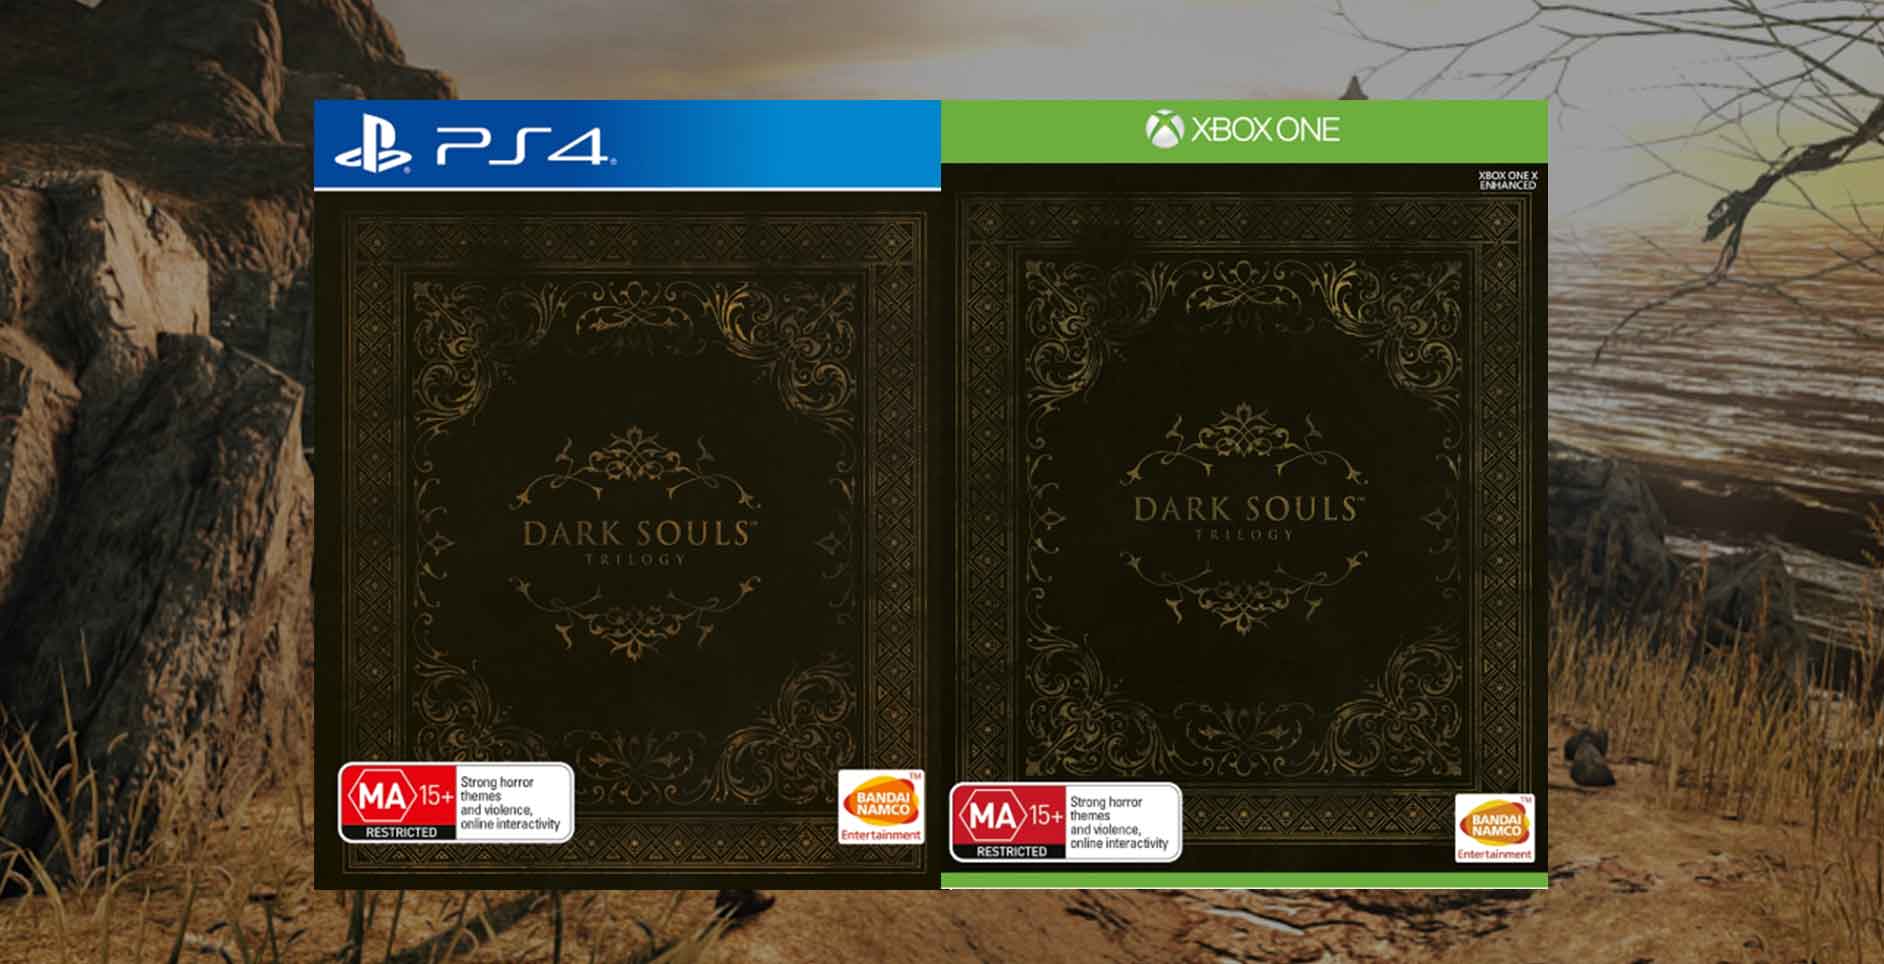 It looks like the Dark Souls Trilogy collection could finally be coming to  Europe